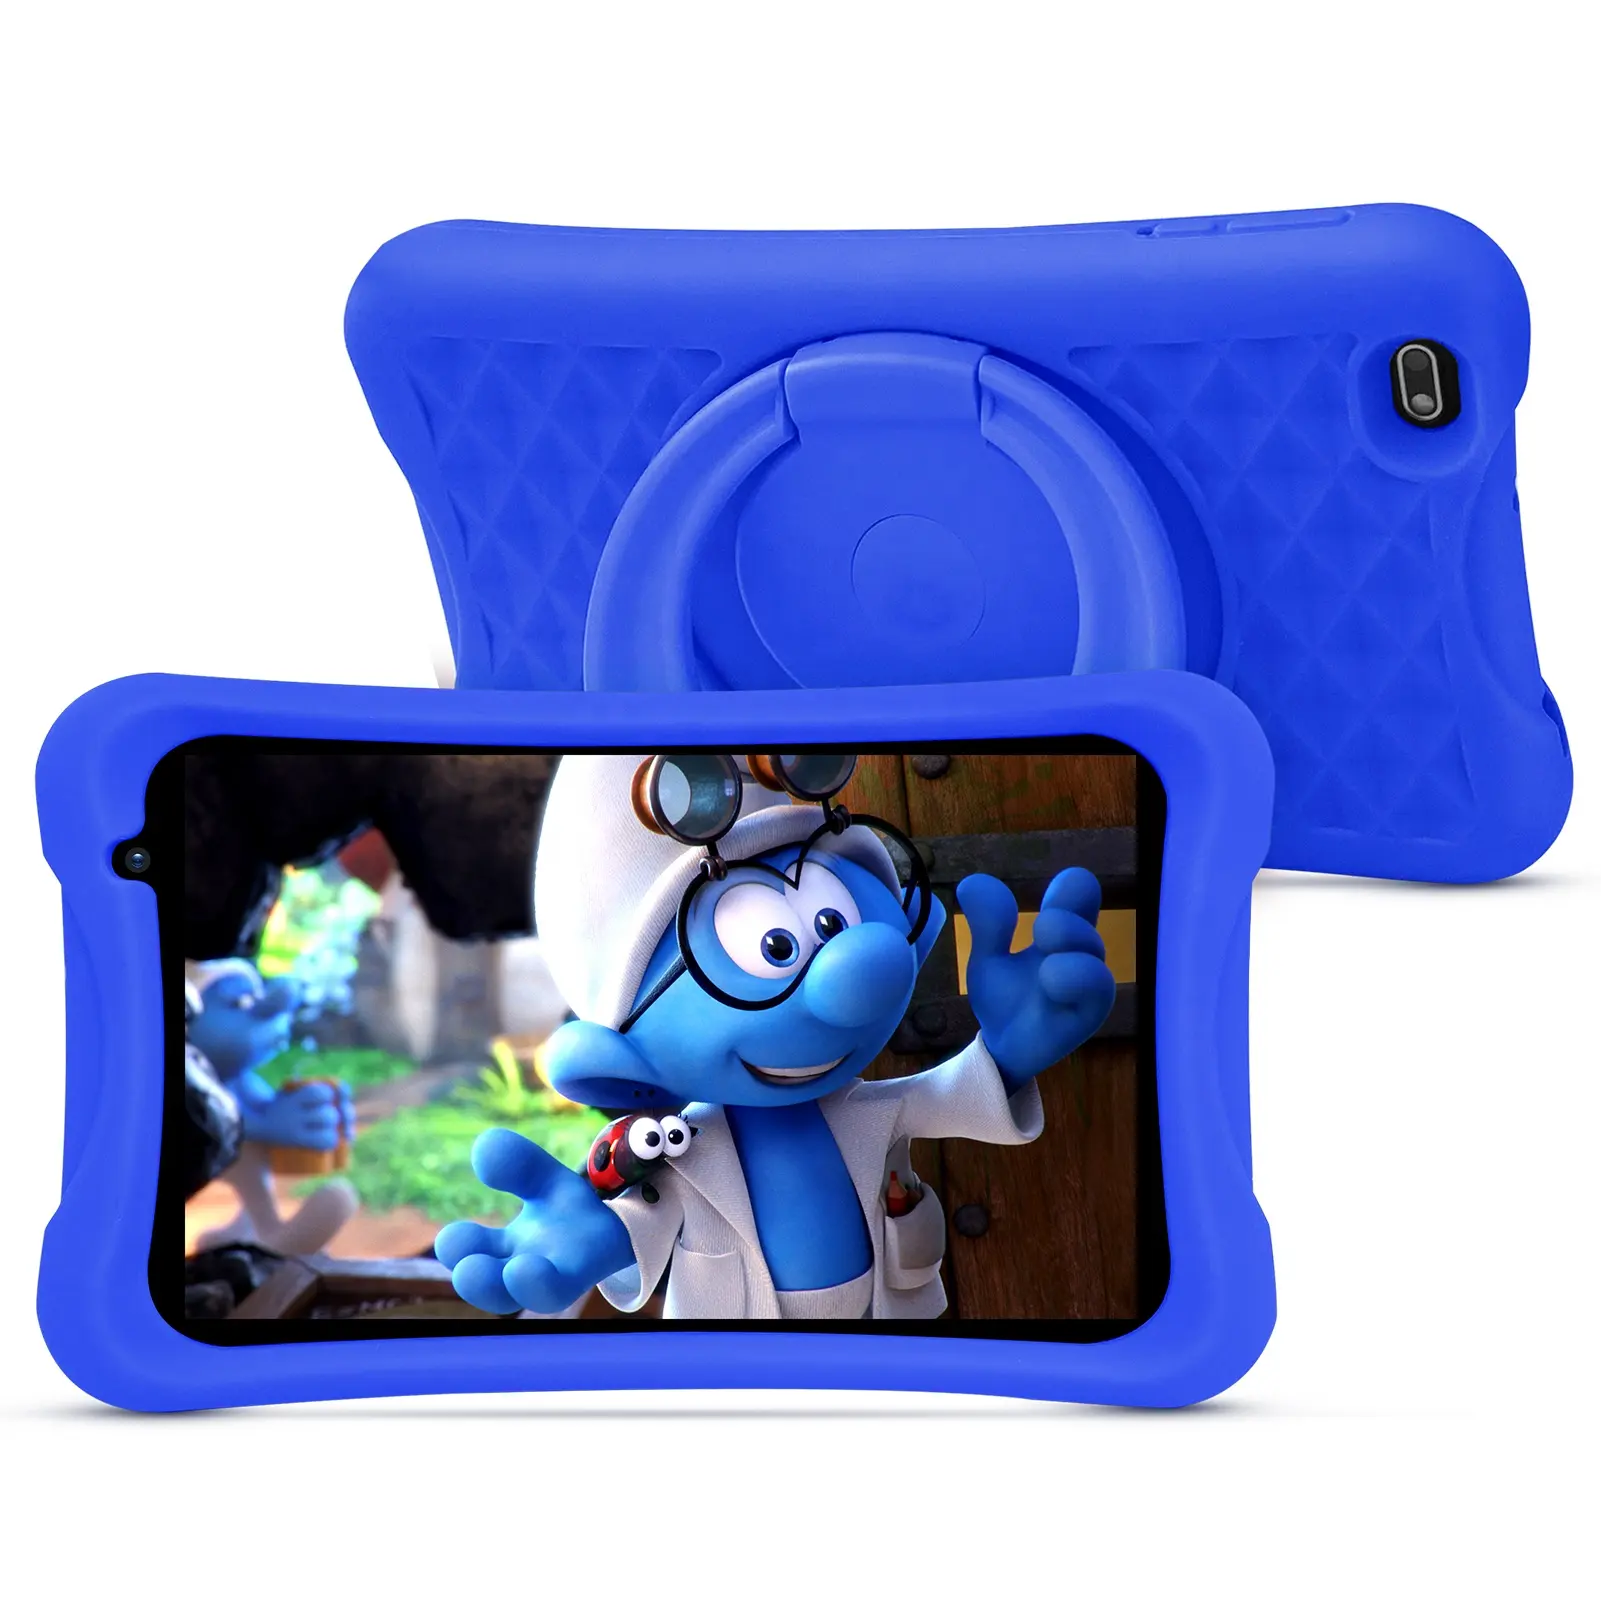 PRITOM L8K 8 Inch Android Kids Tablet PC Unisoc SC7731E Quad Core Tablet Learning Educational For Children